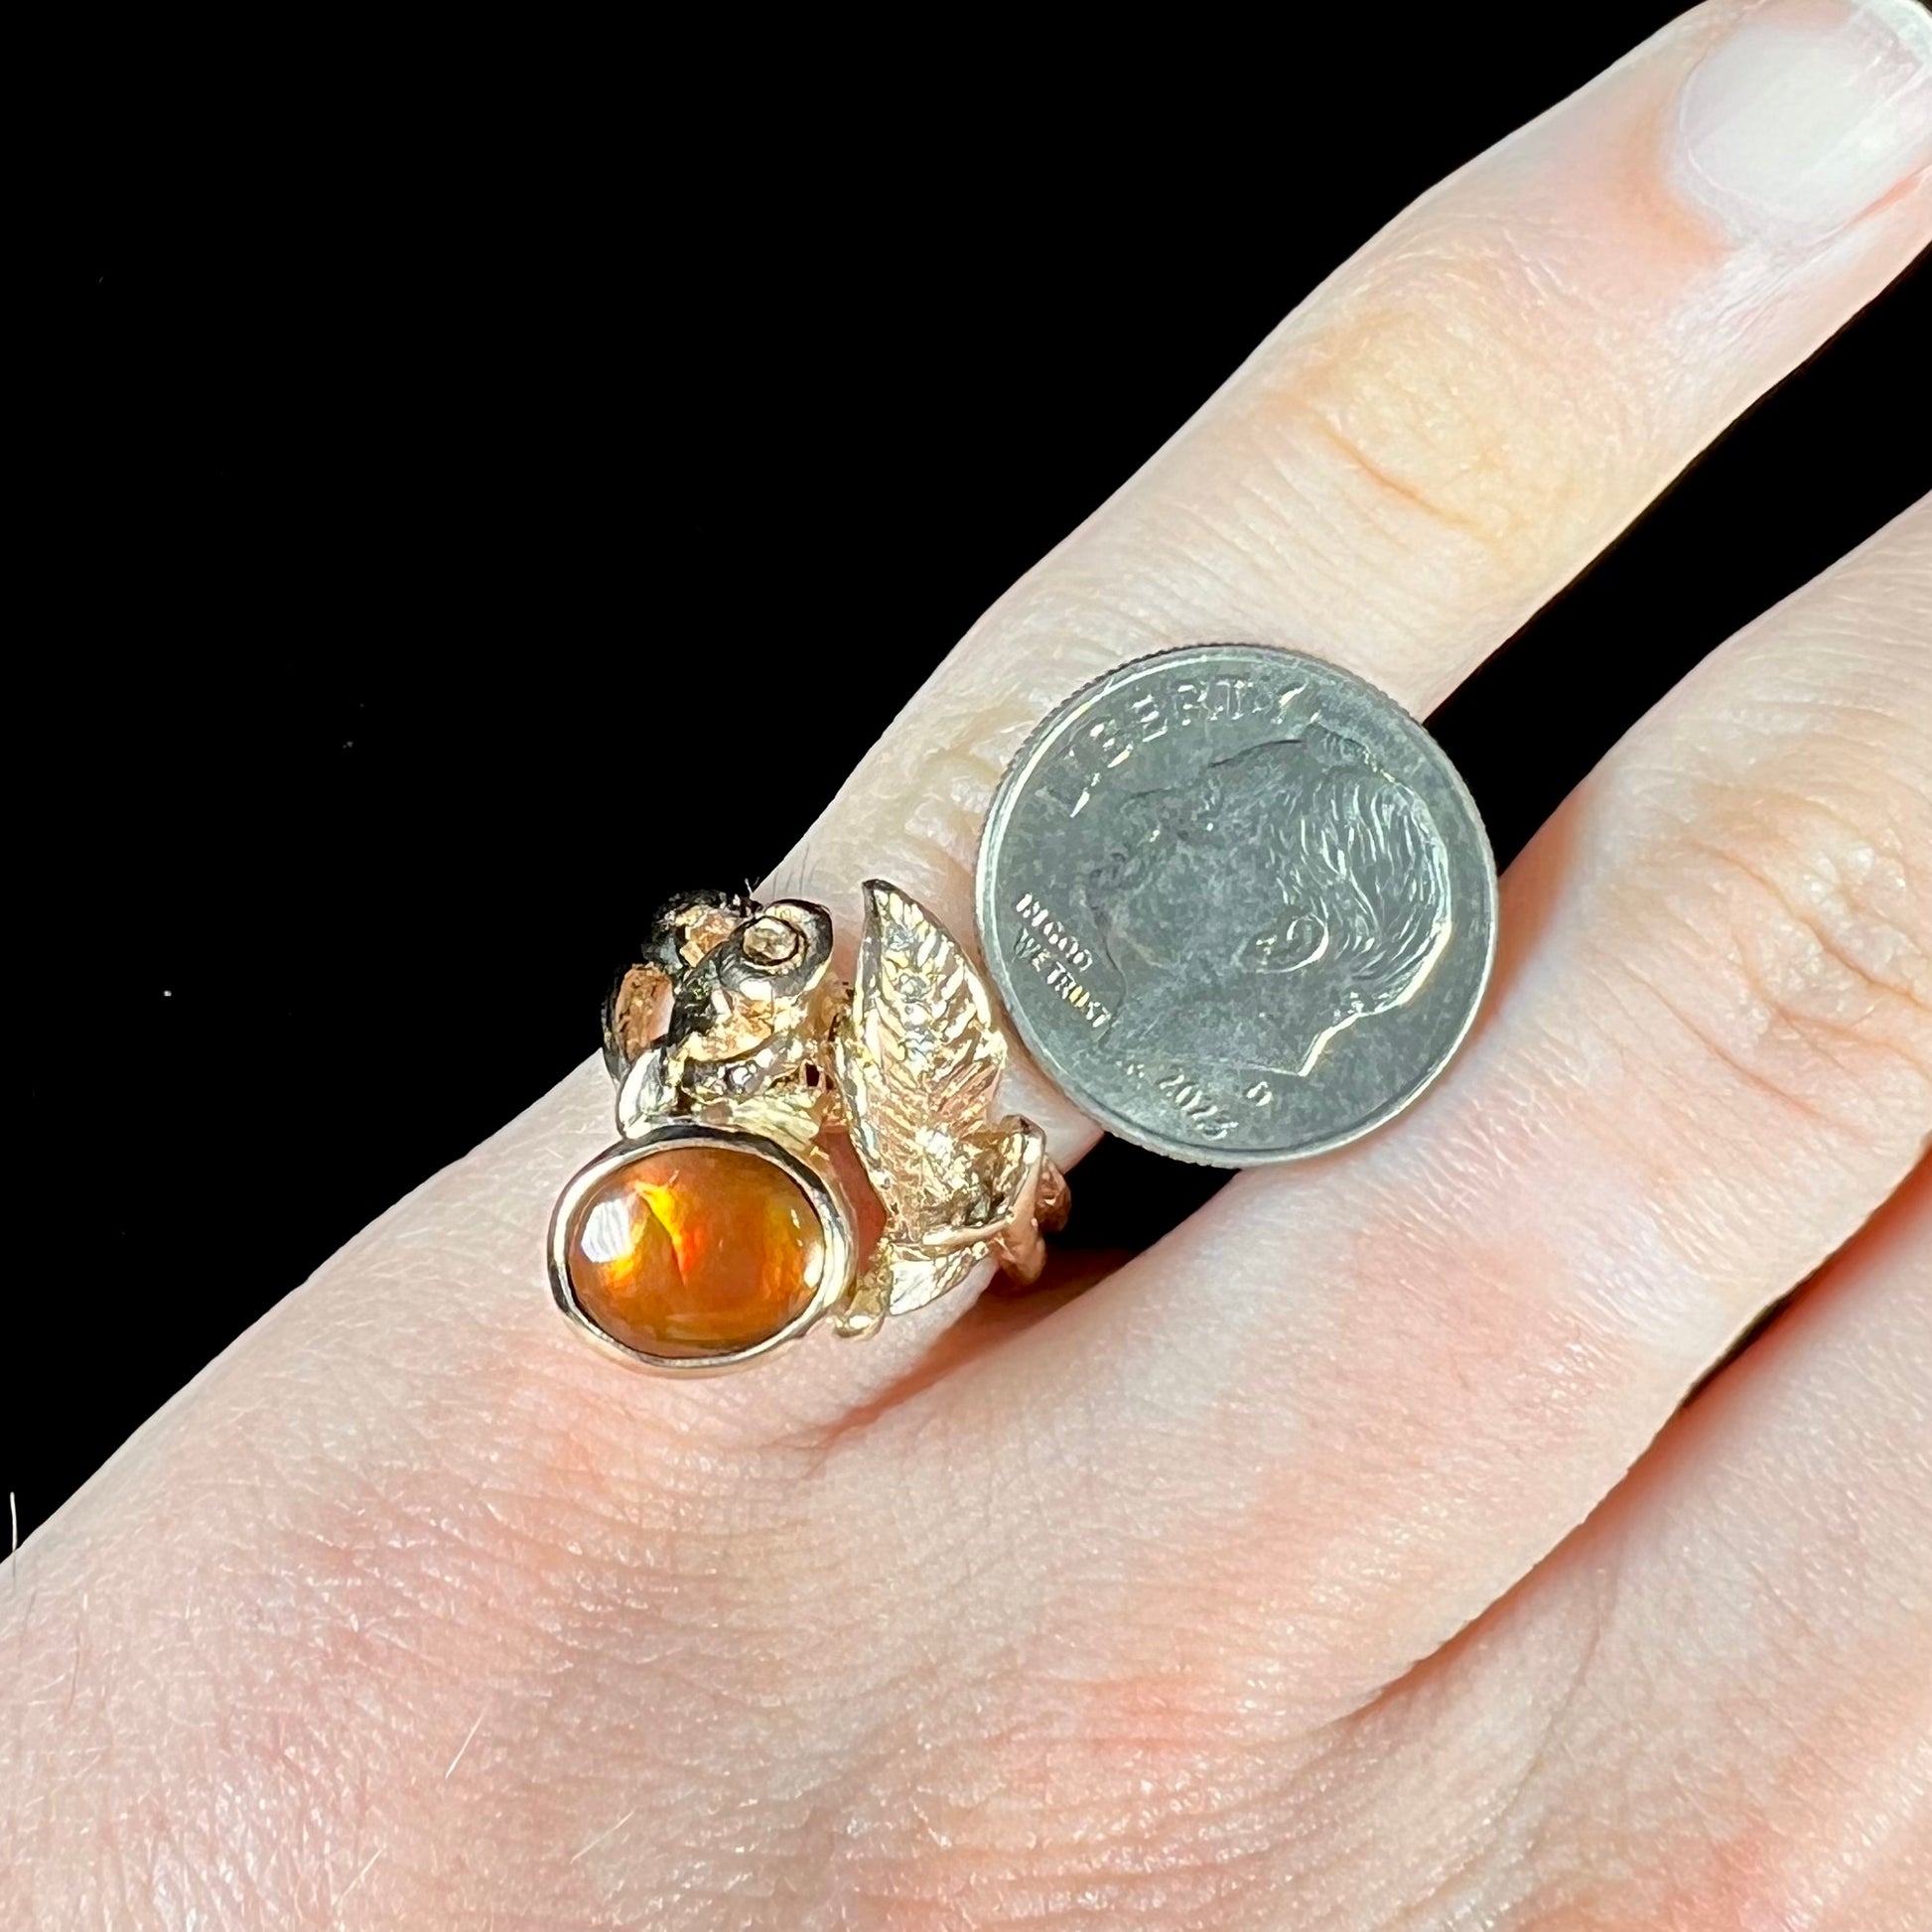 A ladies' yellow gold flower style ring set with an oval cabochon cut fire agate and diamond accents.